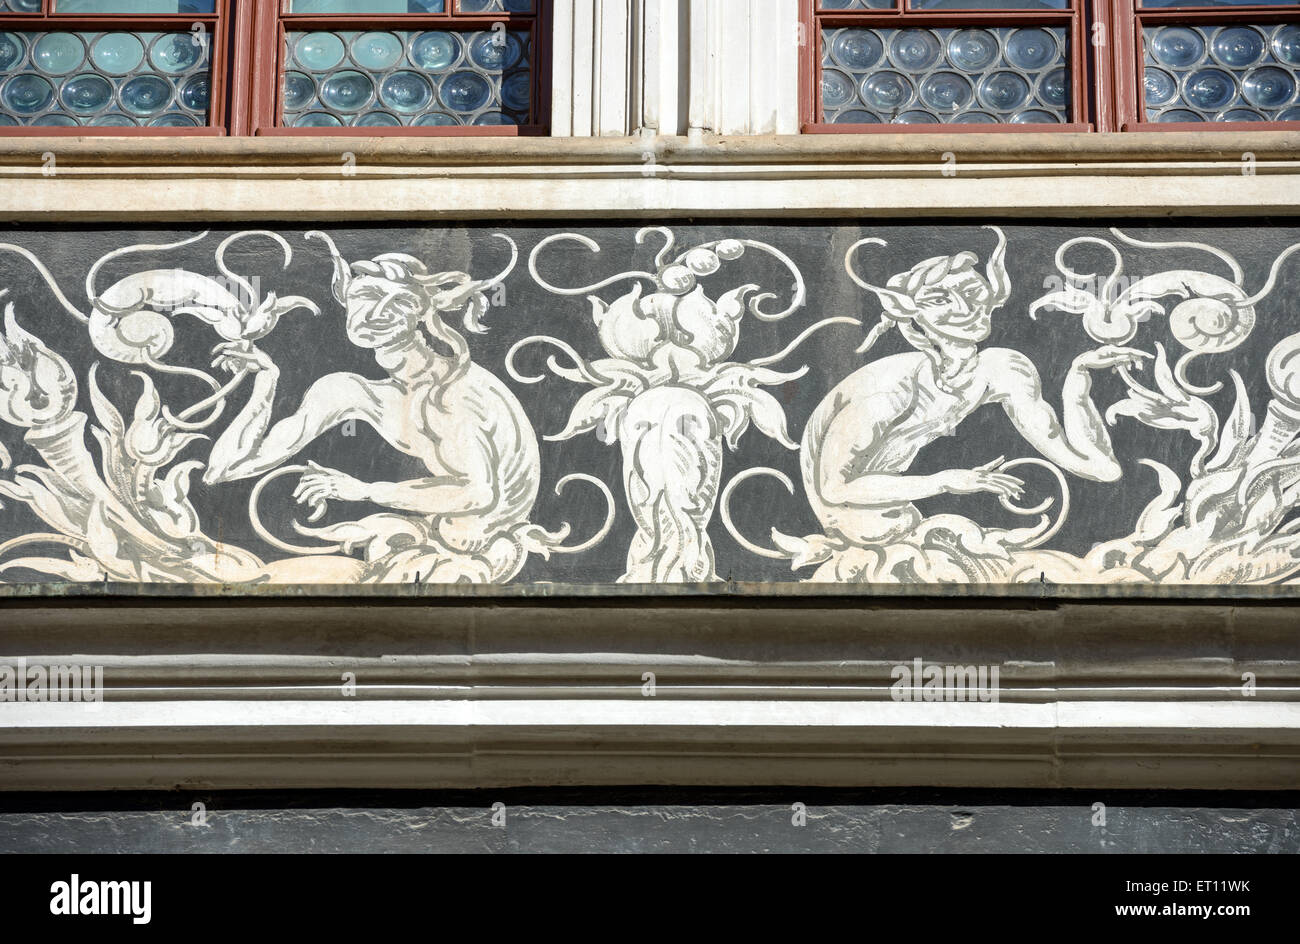 Close-up of sgraffito on facade part above arcade of Stables Courtyard (Stallhof) in Dresden, Germany. Stock Photo